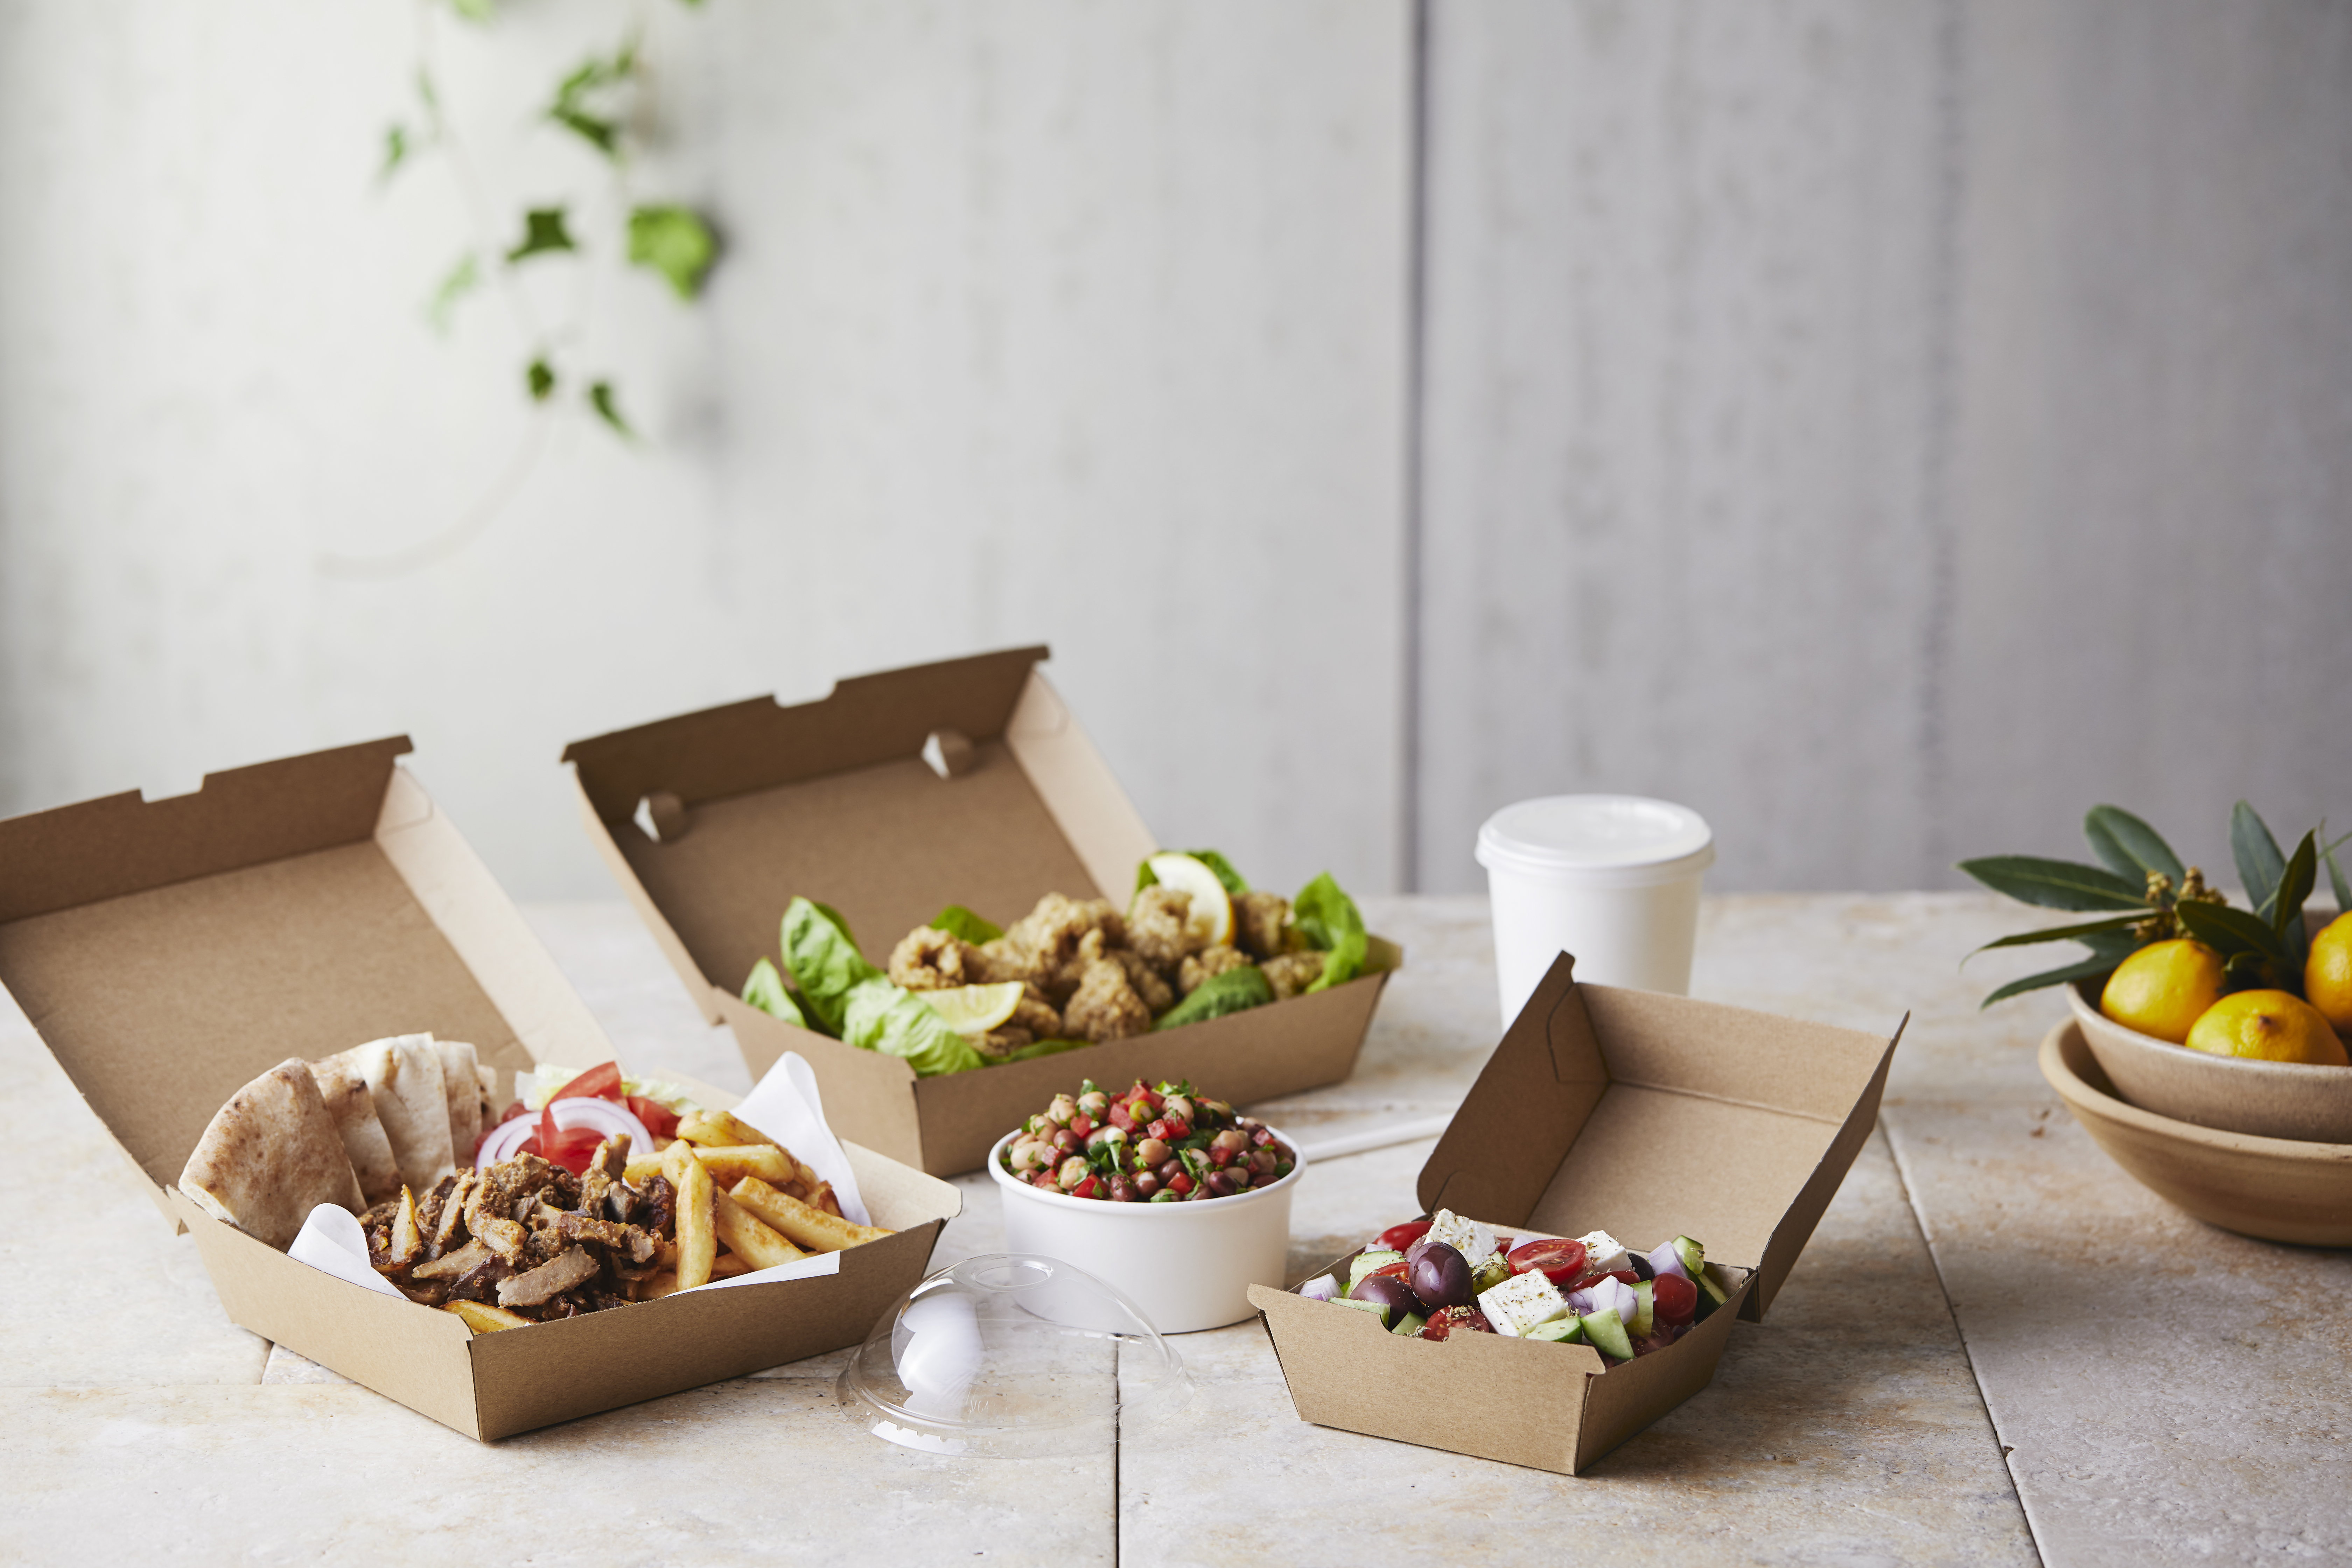 Takeaway chips, meat and salad served in kraft cartons. 